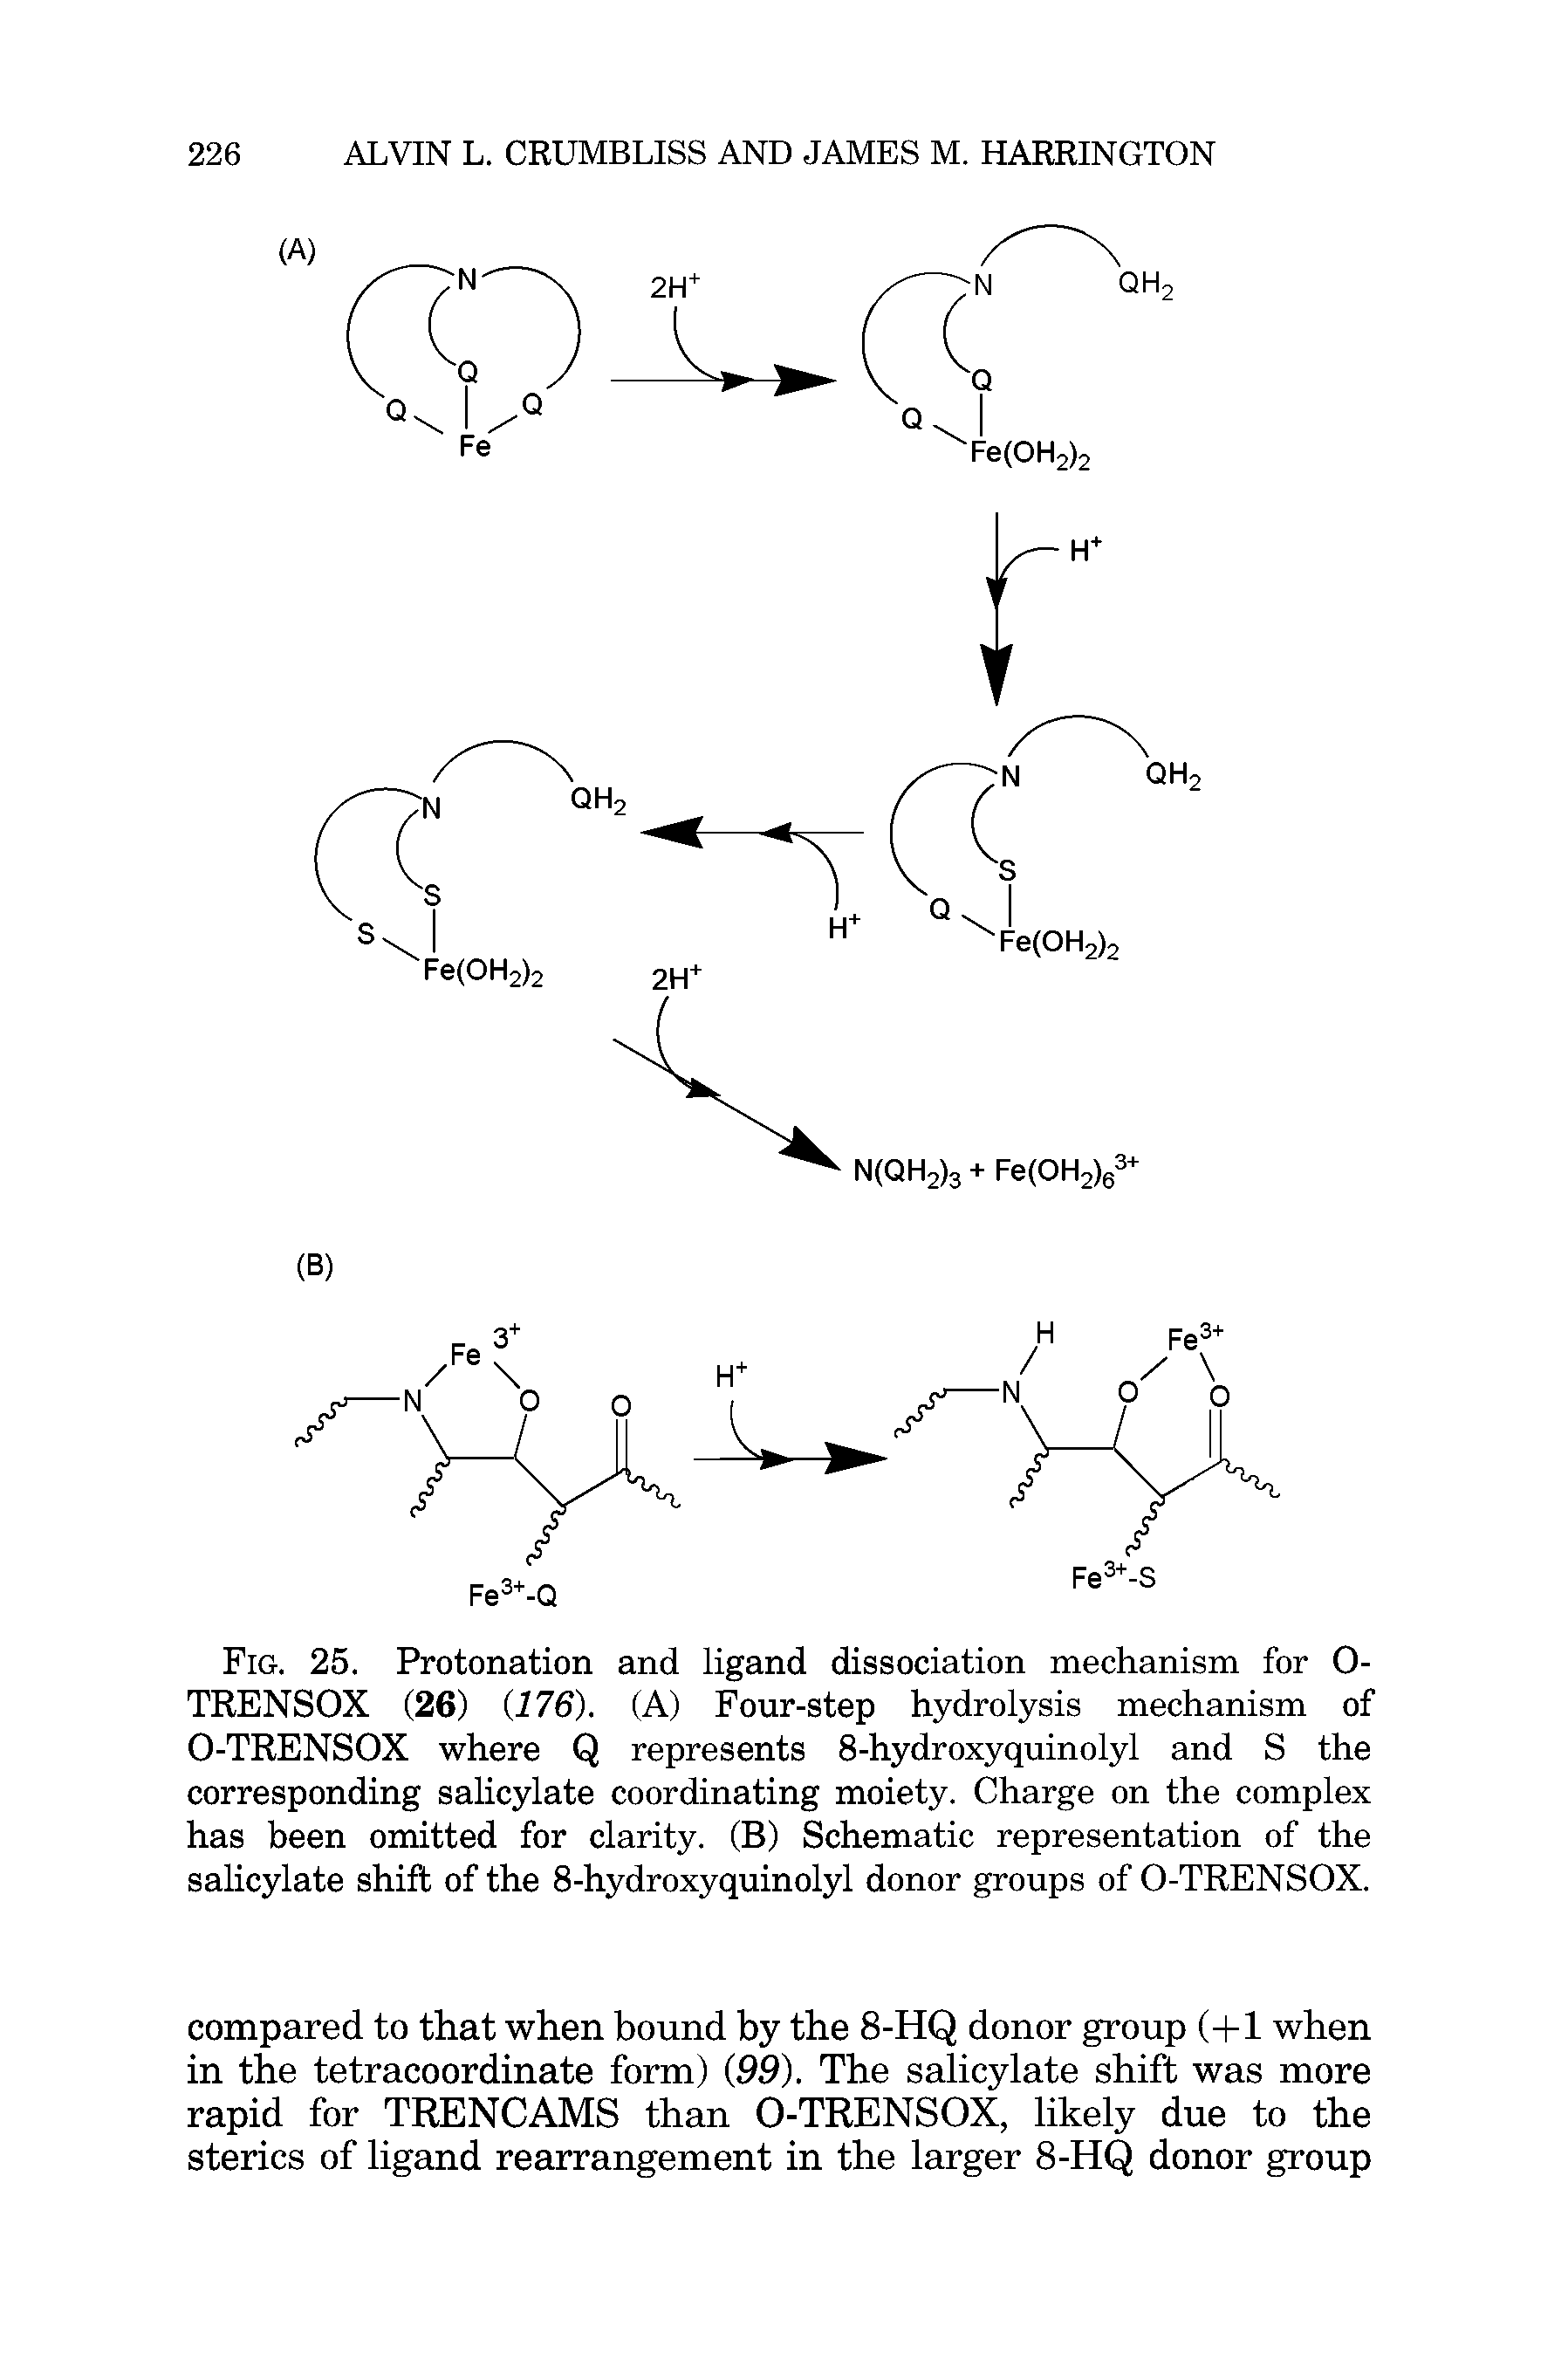 Fig. 25. Protonation and ligand dissociation mechanism for 0-TRENSOX (26) (176). (A) Four-step hydrolysis mechanism of O-TRENSOX where Q represents 8-hydroxyquinolyl and S the corresponding salicylate coordinating moiety. Charge on the complex has been omitted for clarity. (B) Schematic representation of the salicylate shift of the 8-hydroxyquinolyl donor groups of O-TRENSOX.